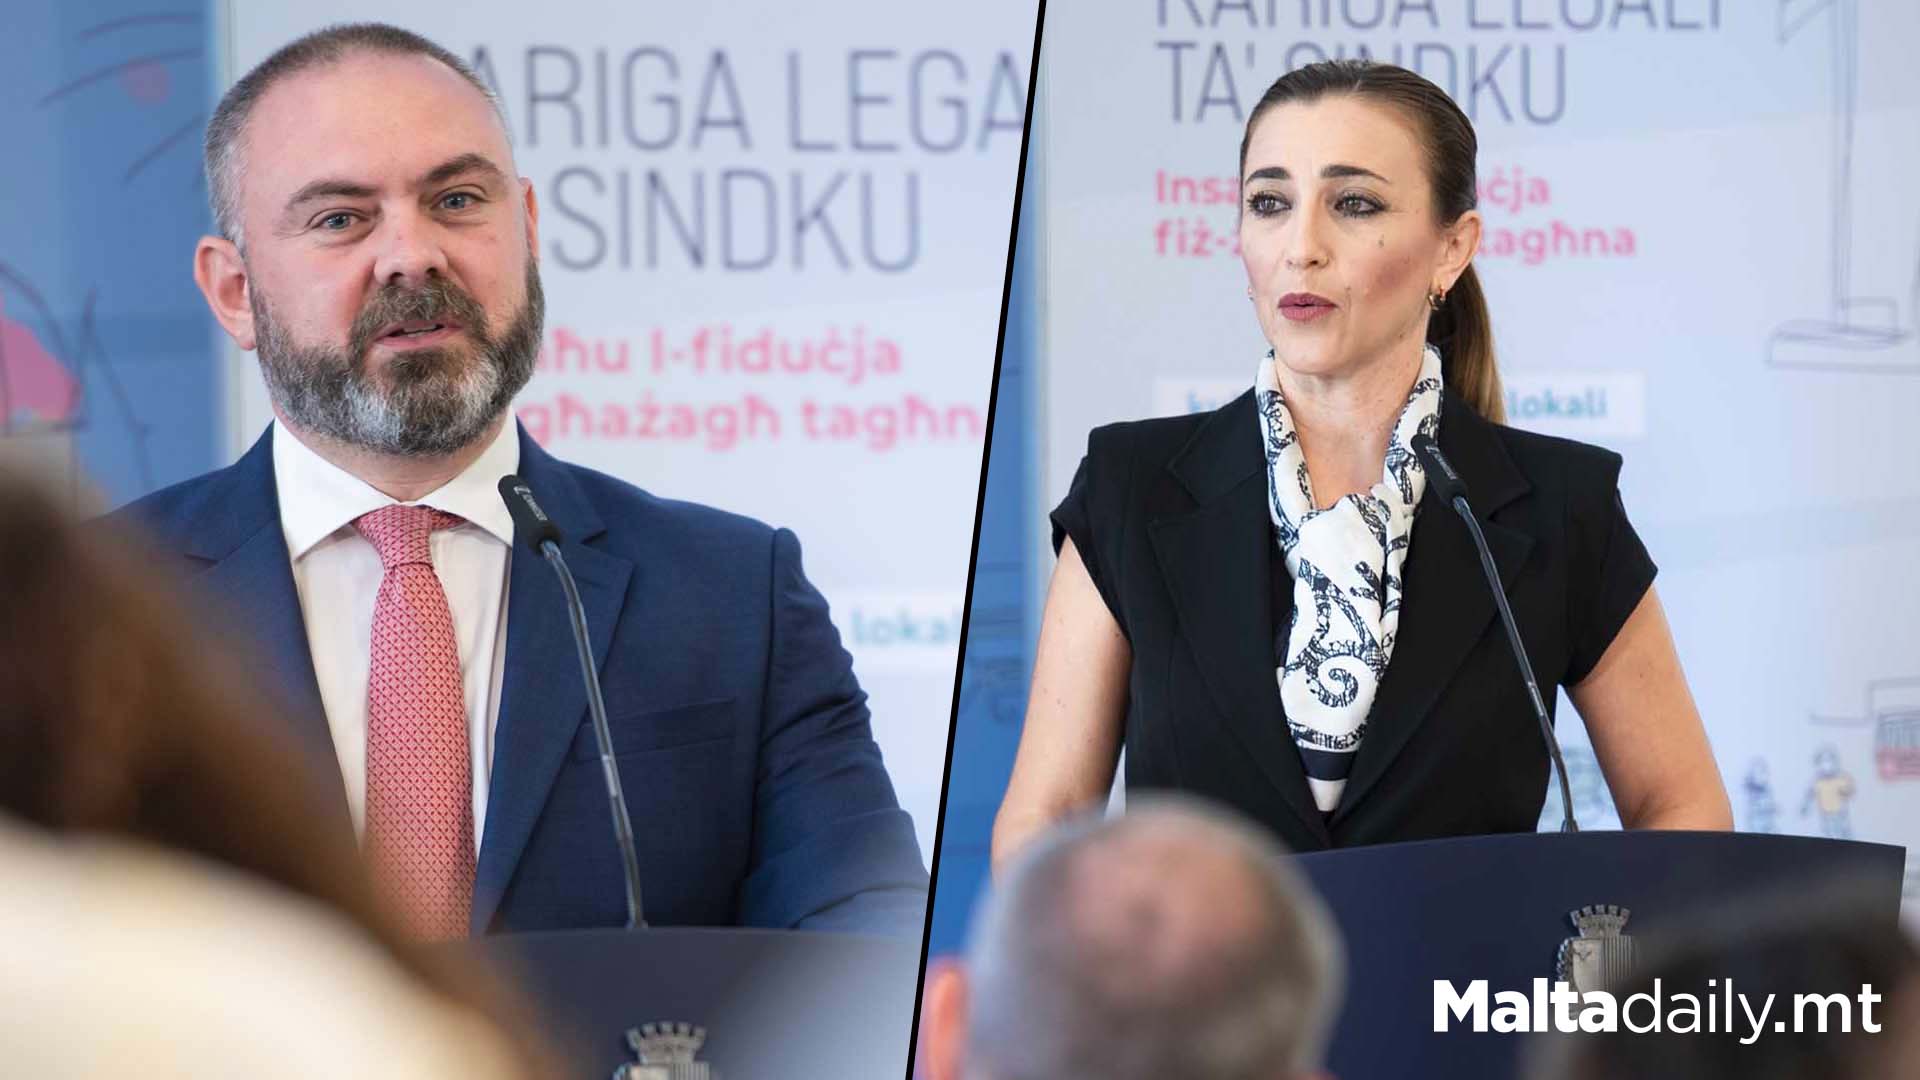 Malta Could Soon Have 16 Or 17 Year Old Mayors